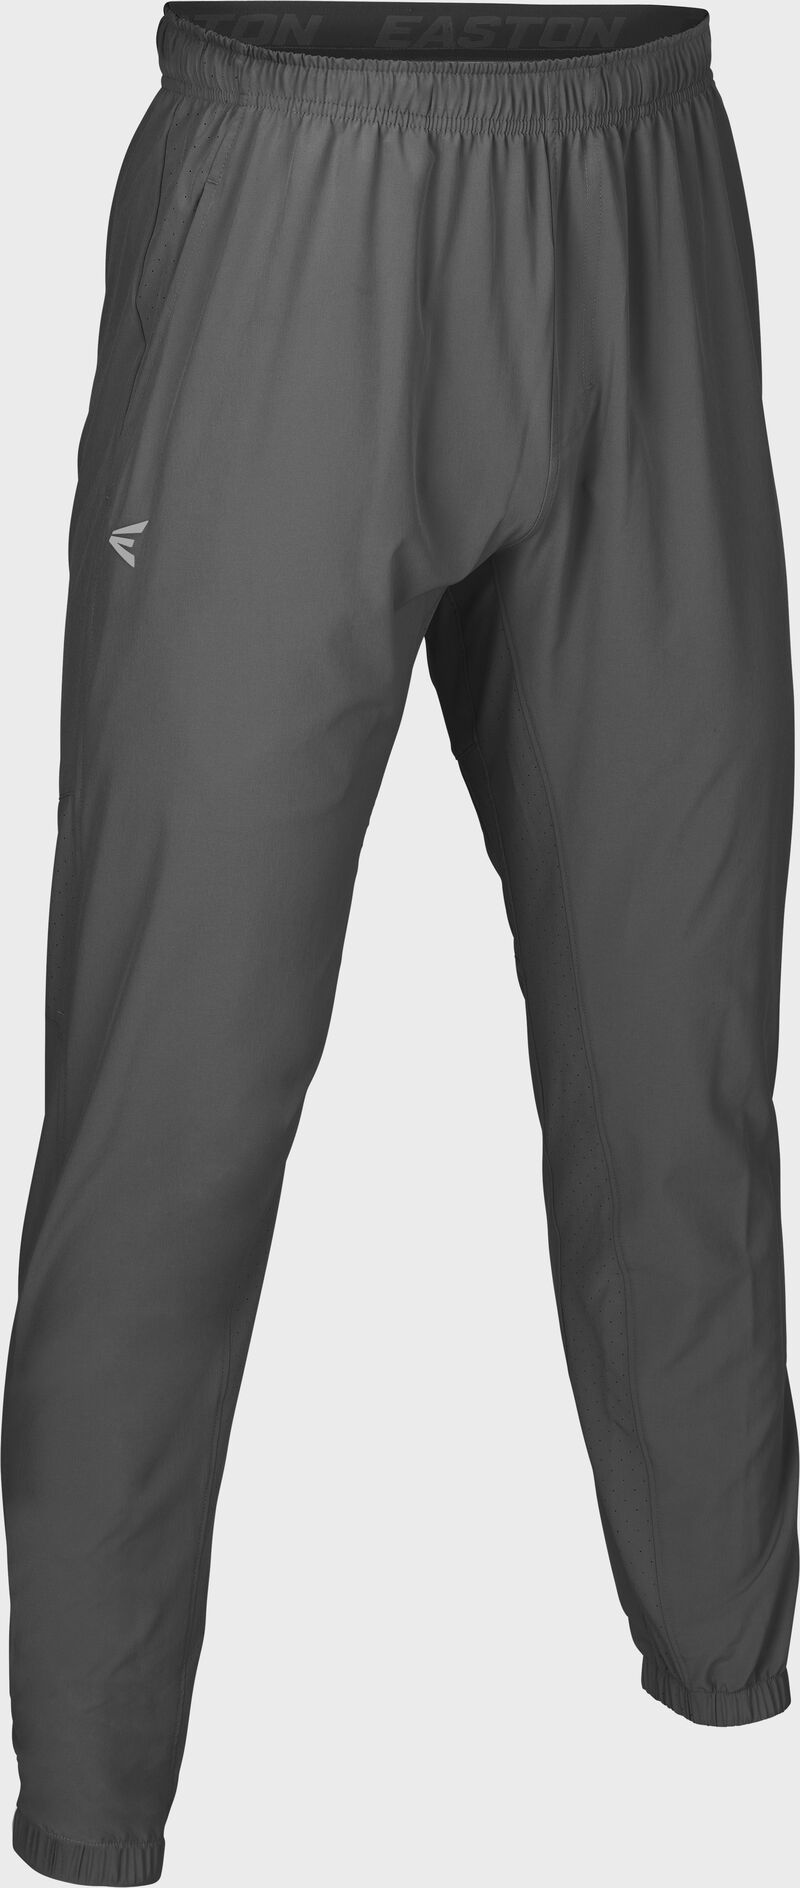 https://easton.rawlings.com/dw/image/v2/BBBJ_PRD/on/demandware.static/-/Sites-master-catalog/default/dw03517992/products/Gameday-SW-Pant_CH_A167642-front_trans.jpg?sw=800&sfrm=png&bgcolor=ebebeb